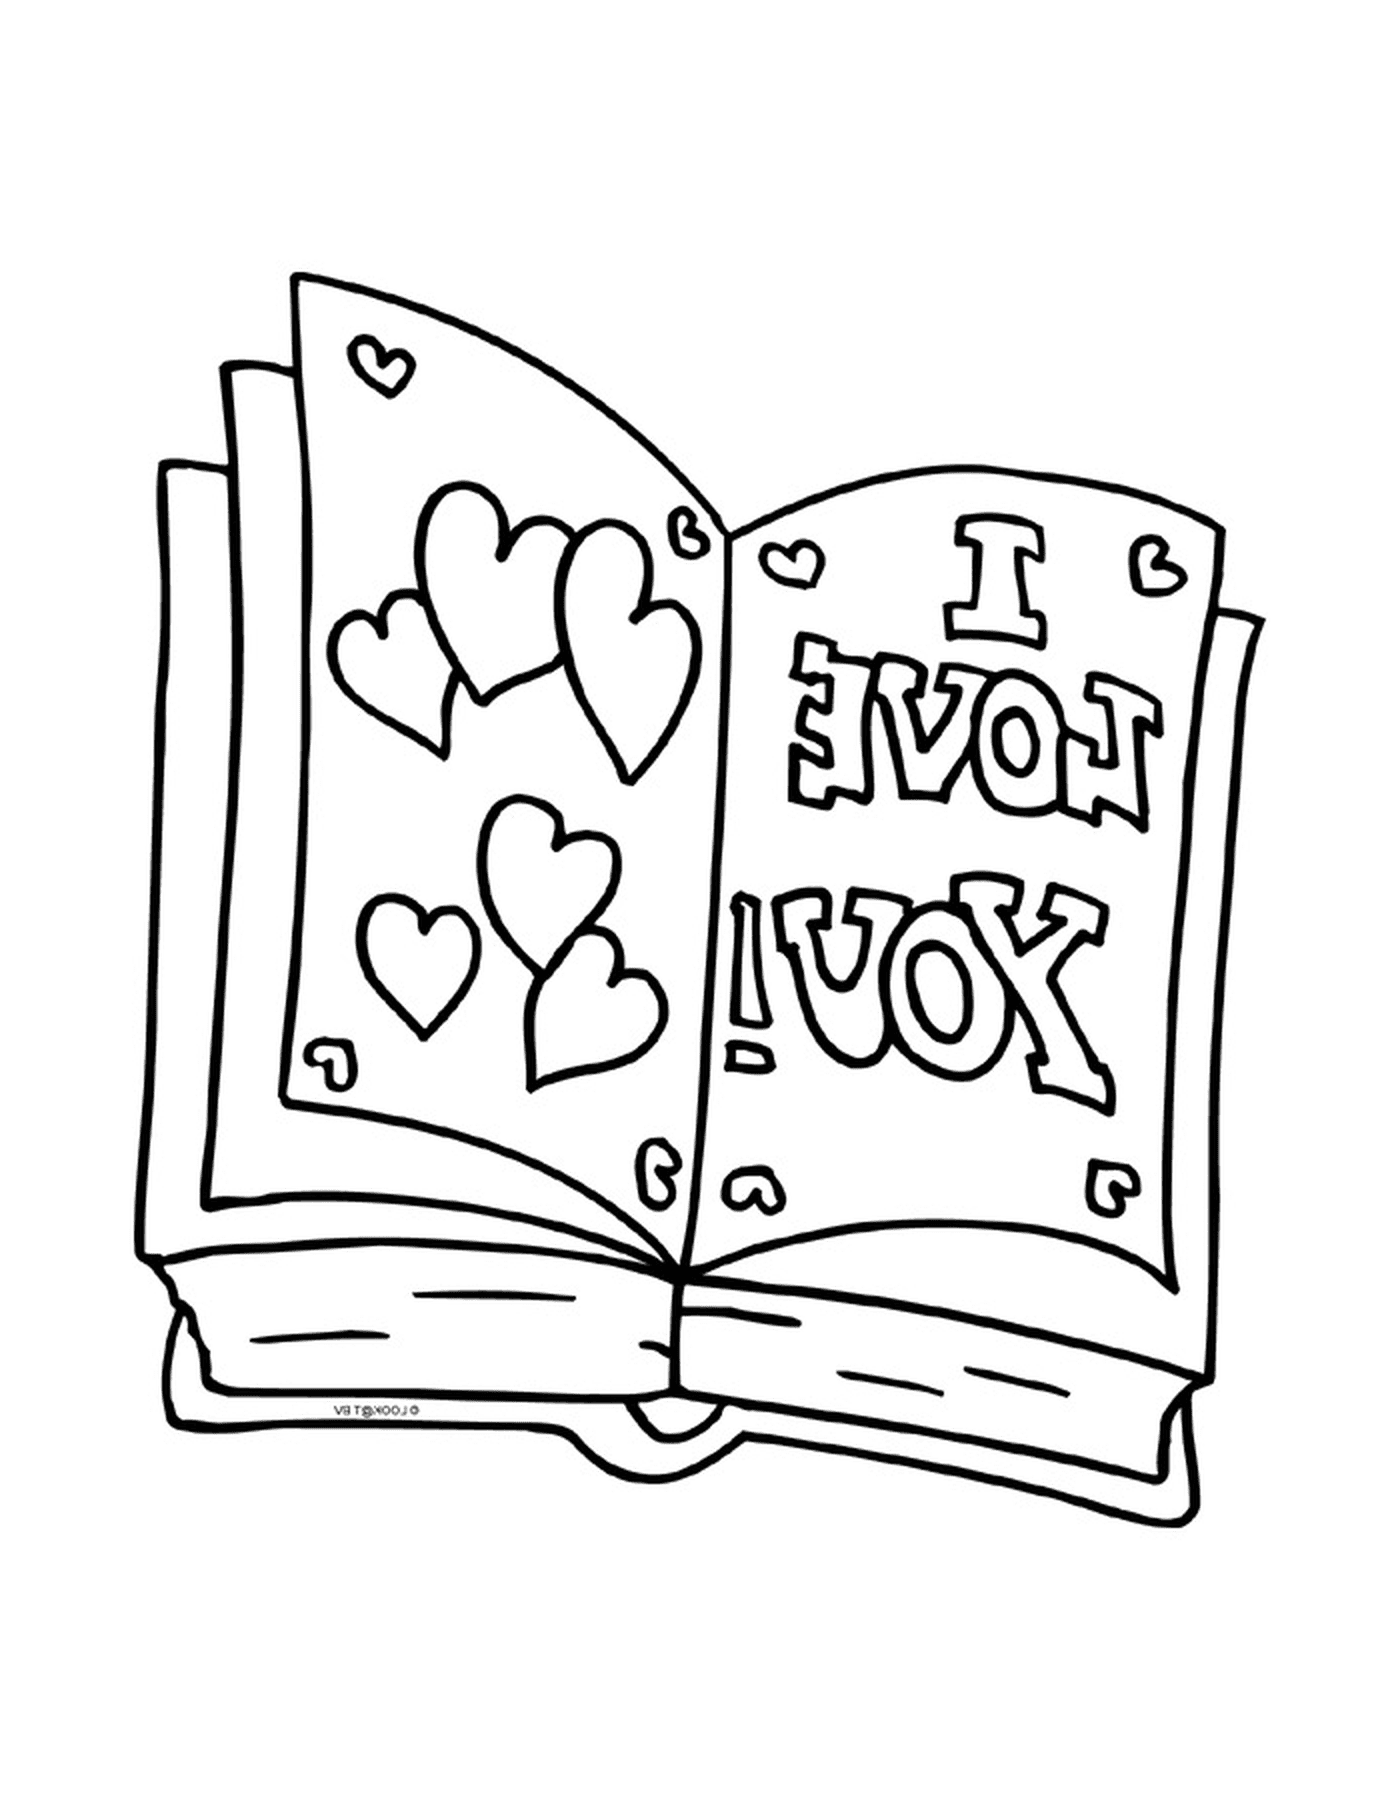  An open book that says I love you 